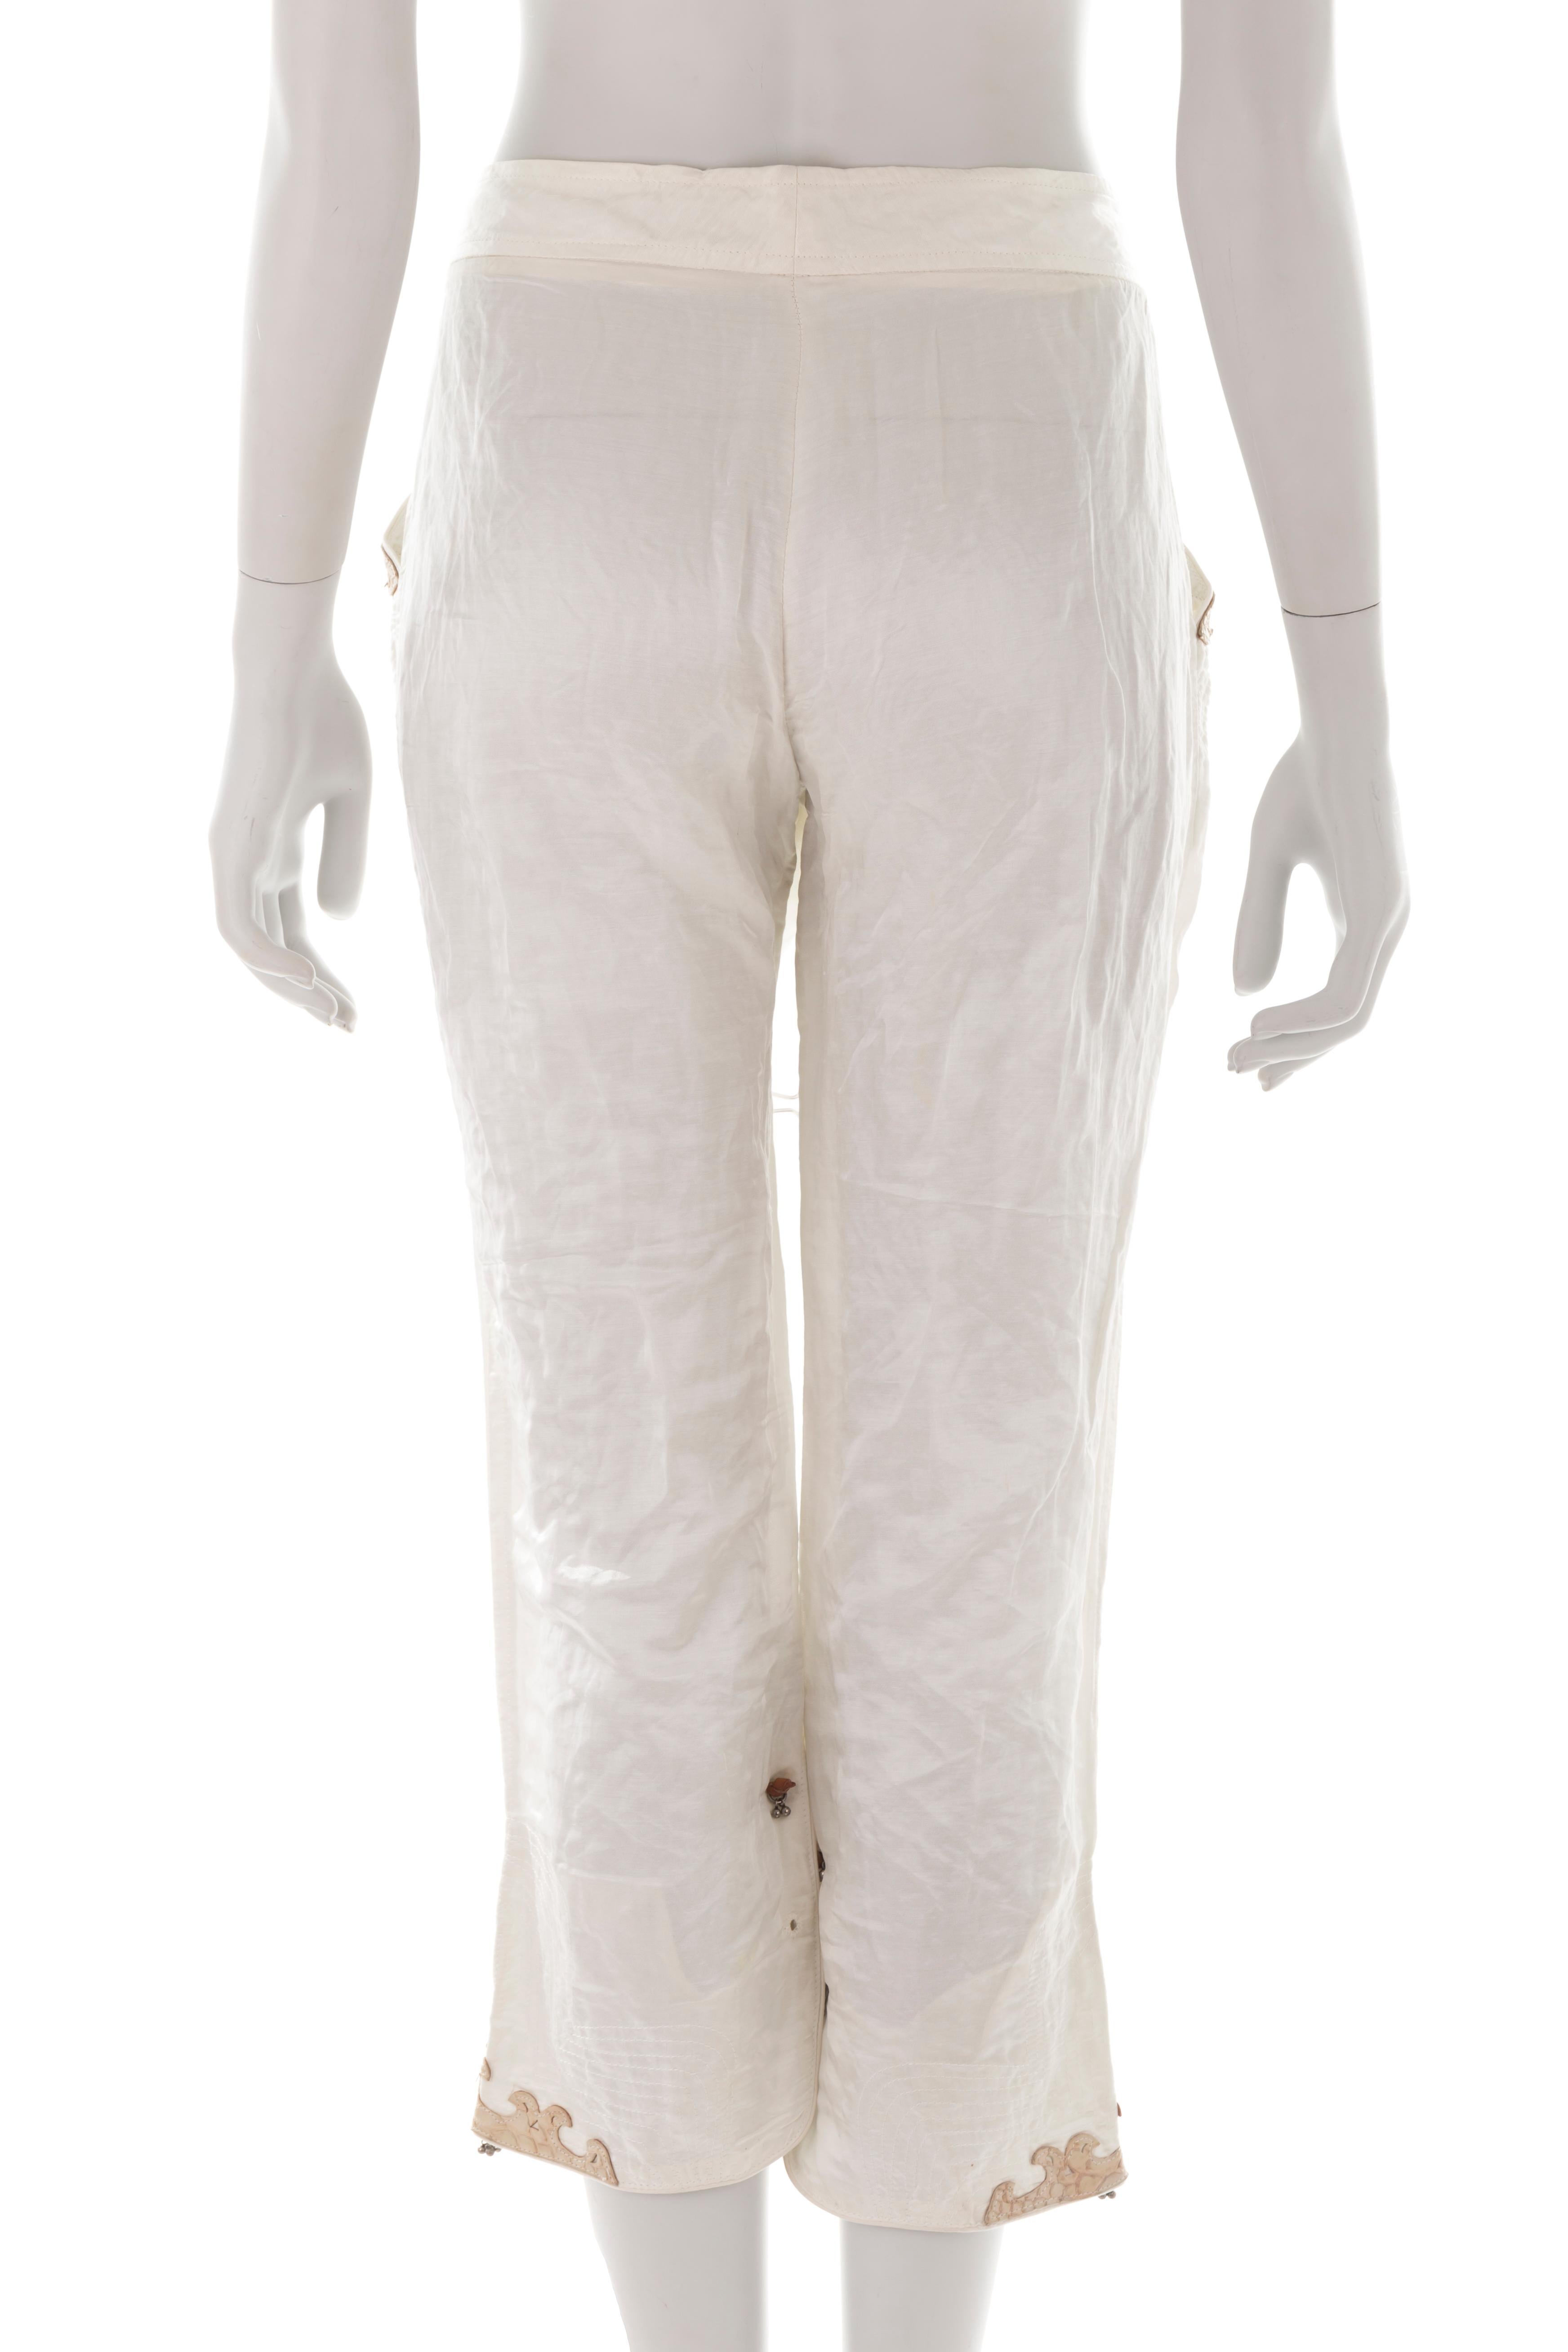 Ermanno Scervino S/S 2005 ivory silk capri pants In Excellent Condition For Sale In Rome, IT